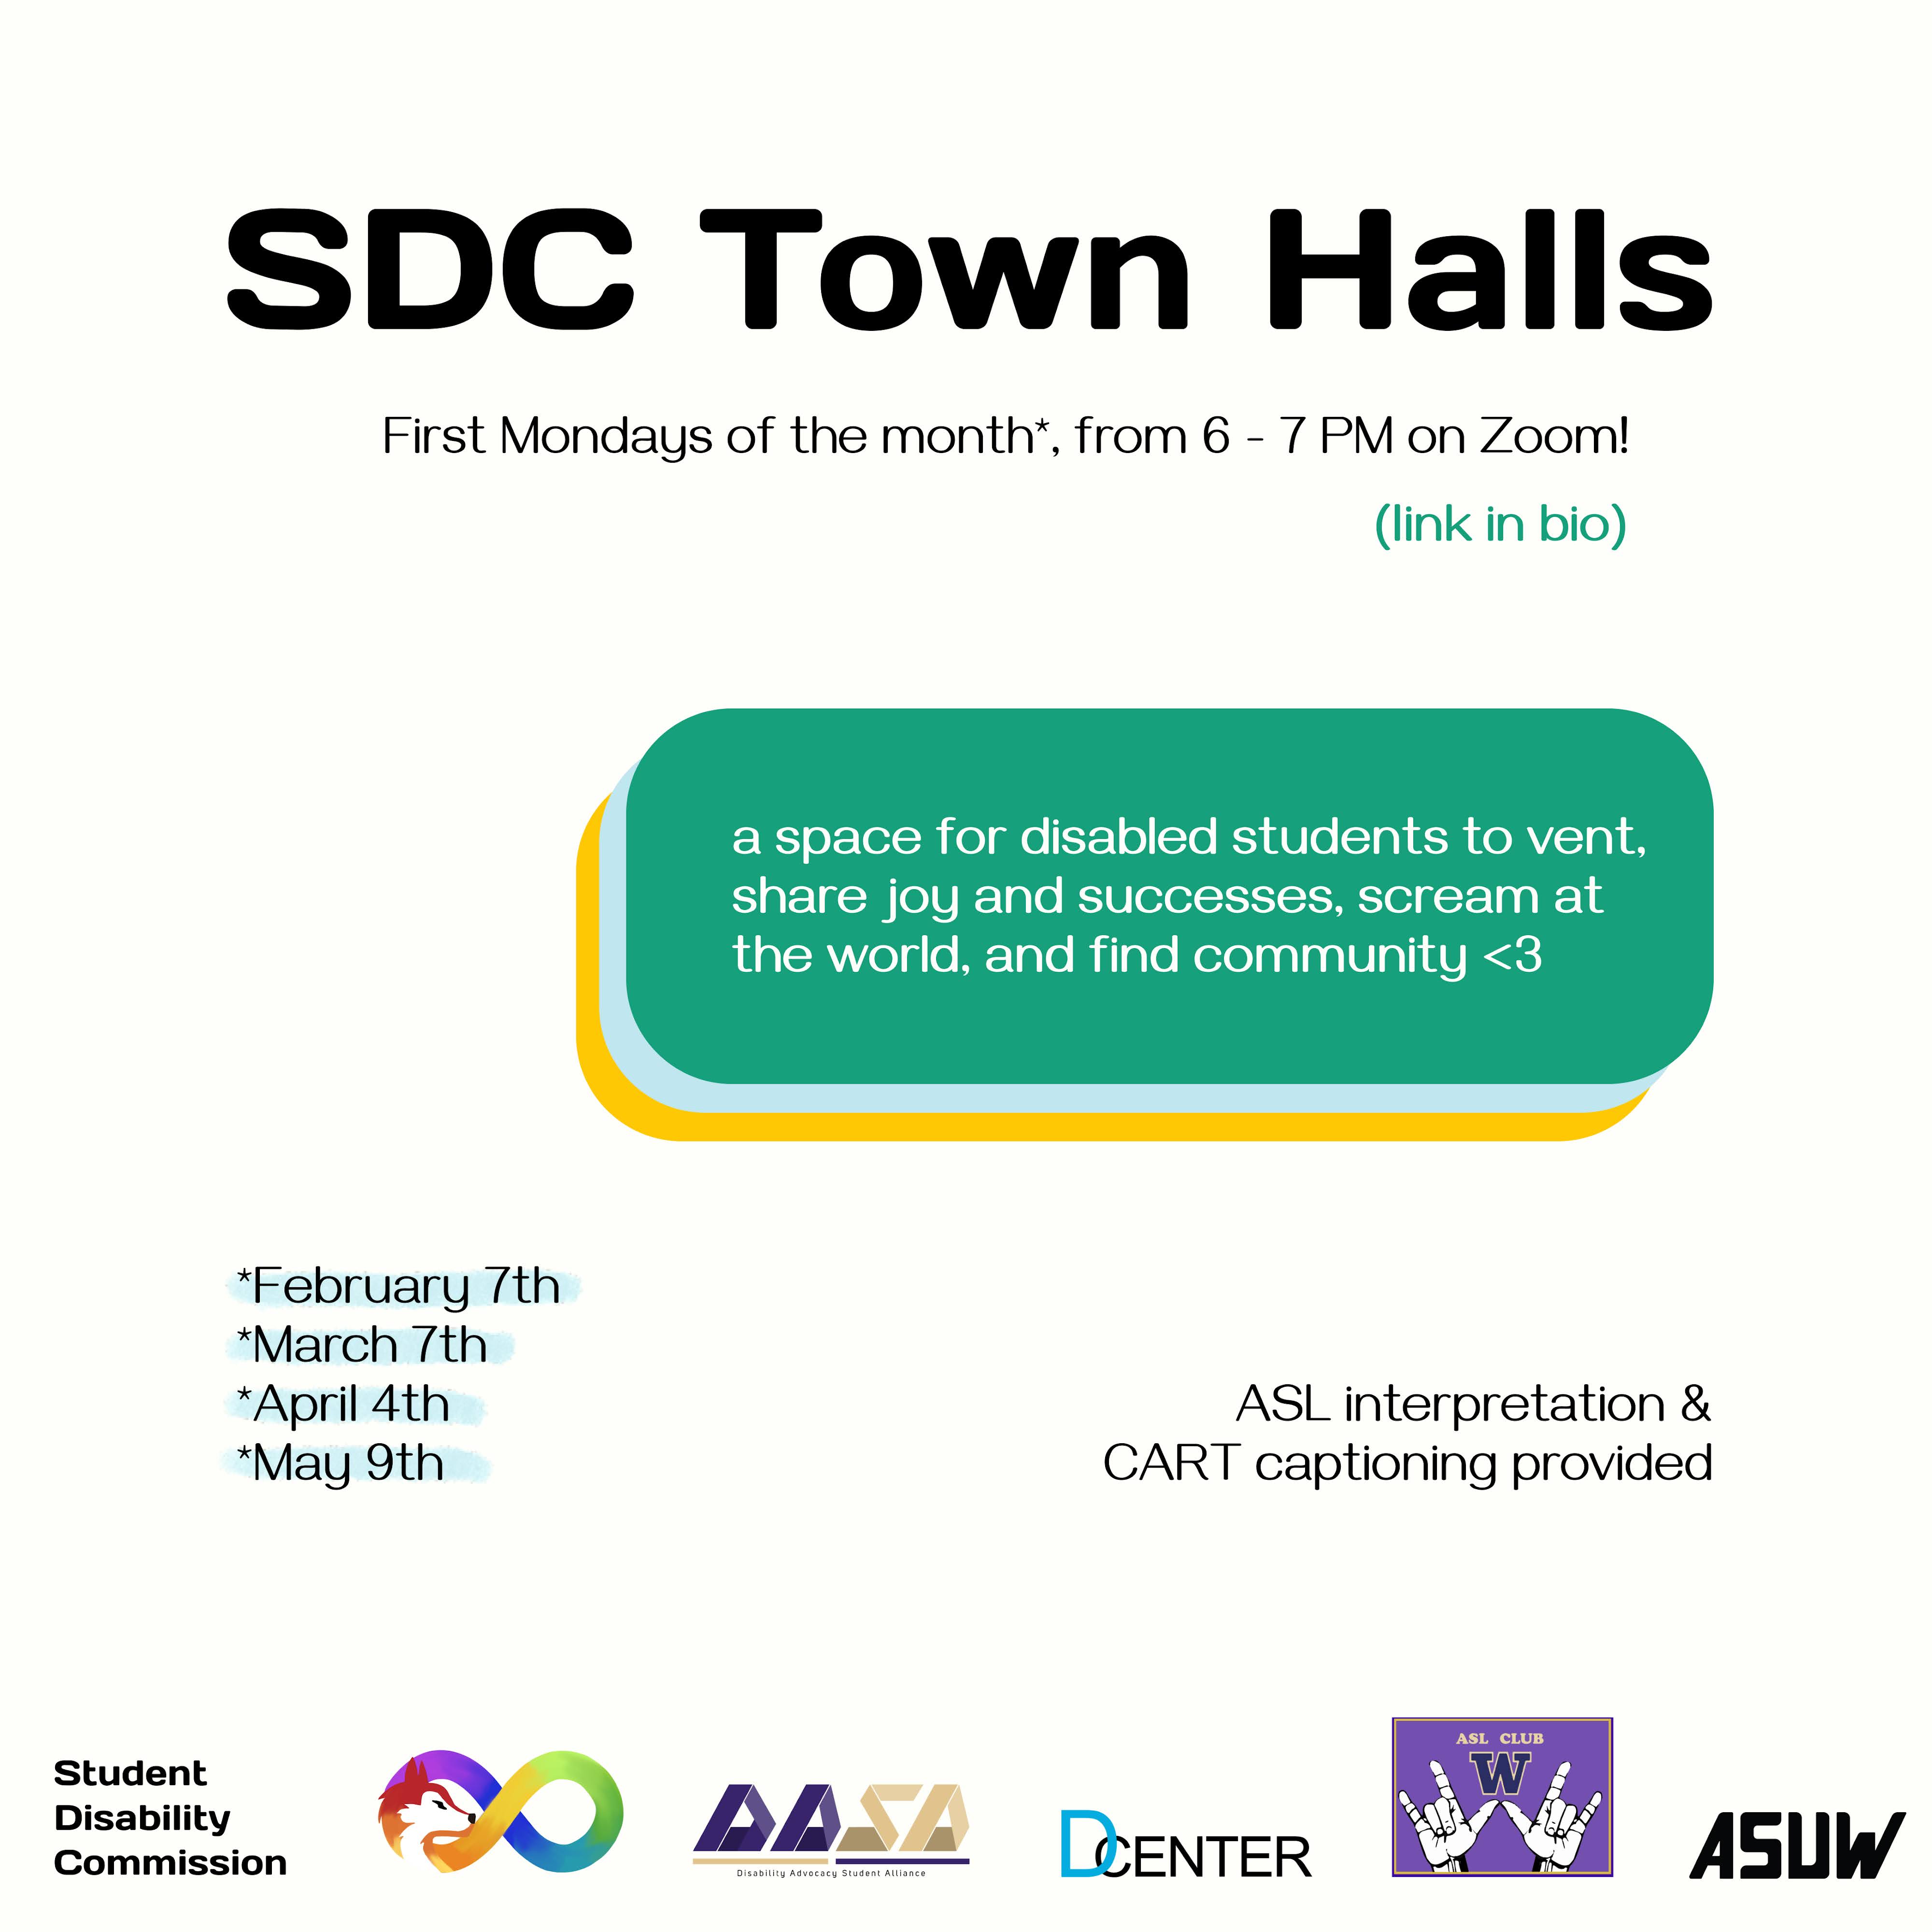 SDC Town Hall Poster